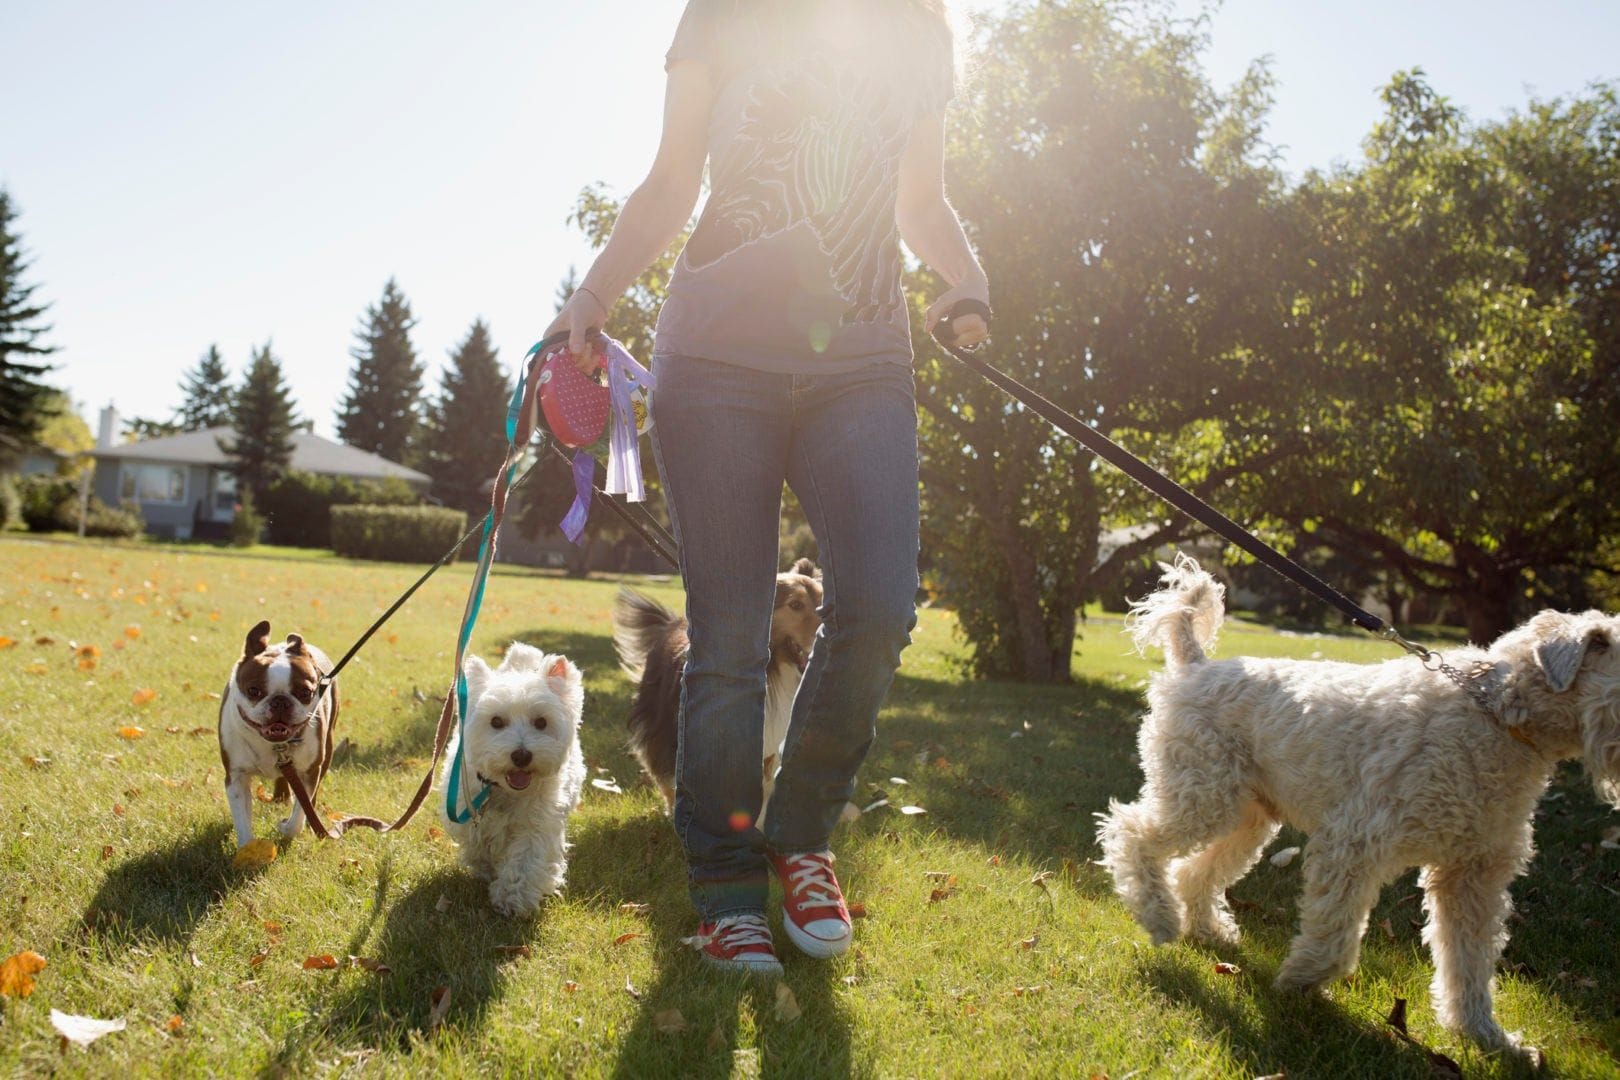 Dog walking service: Check recommendations, review qualifications